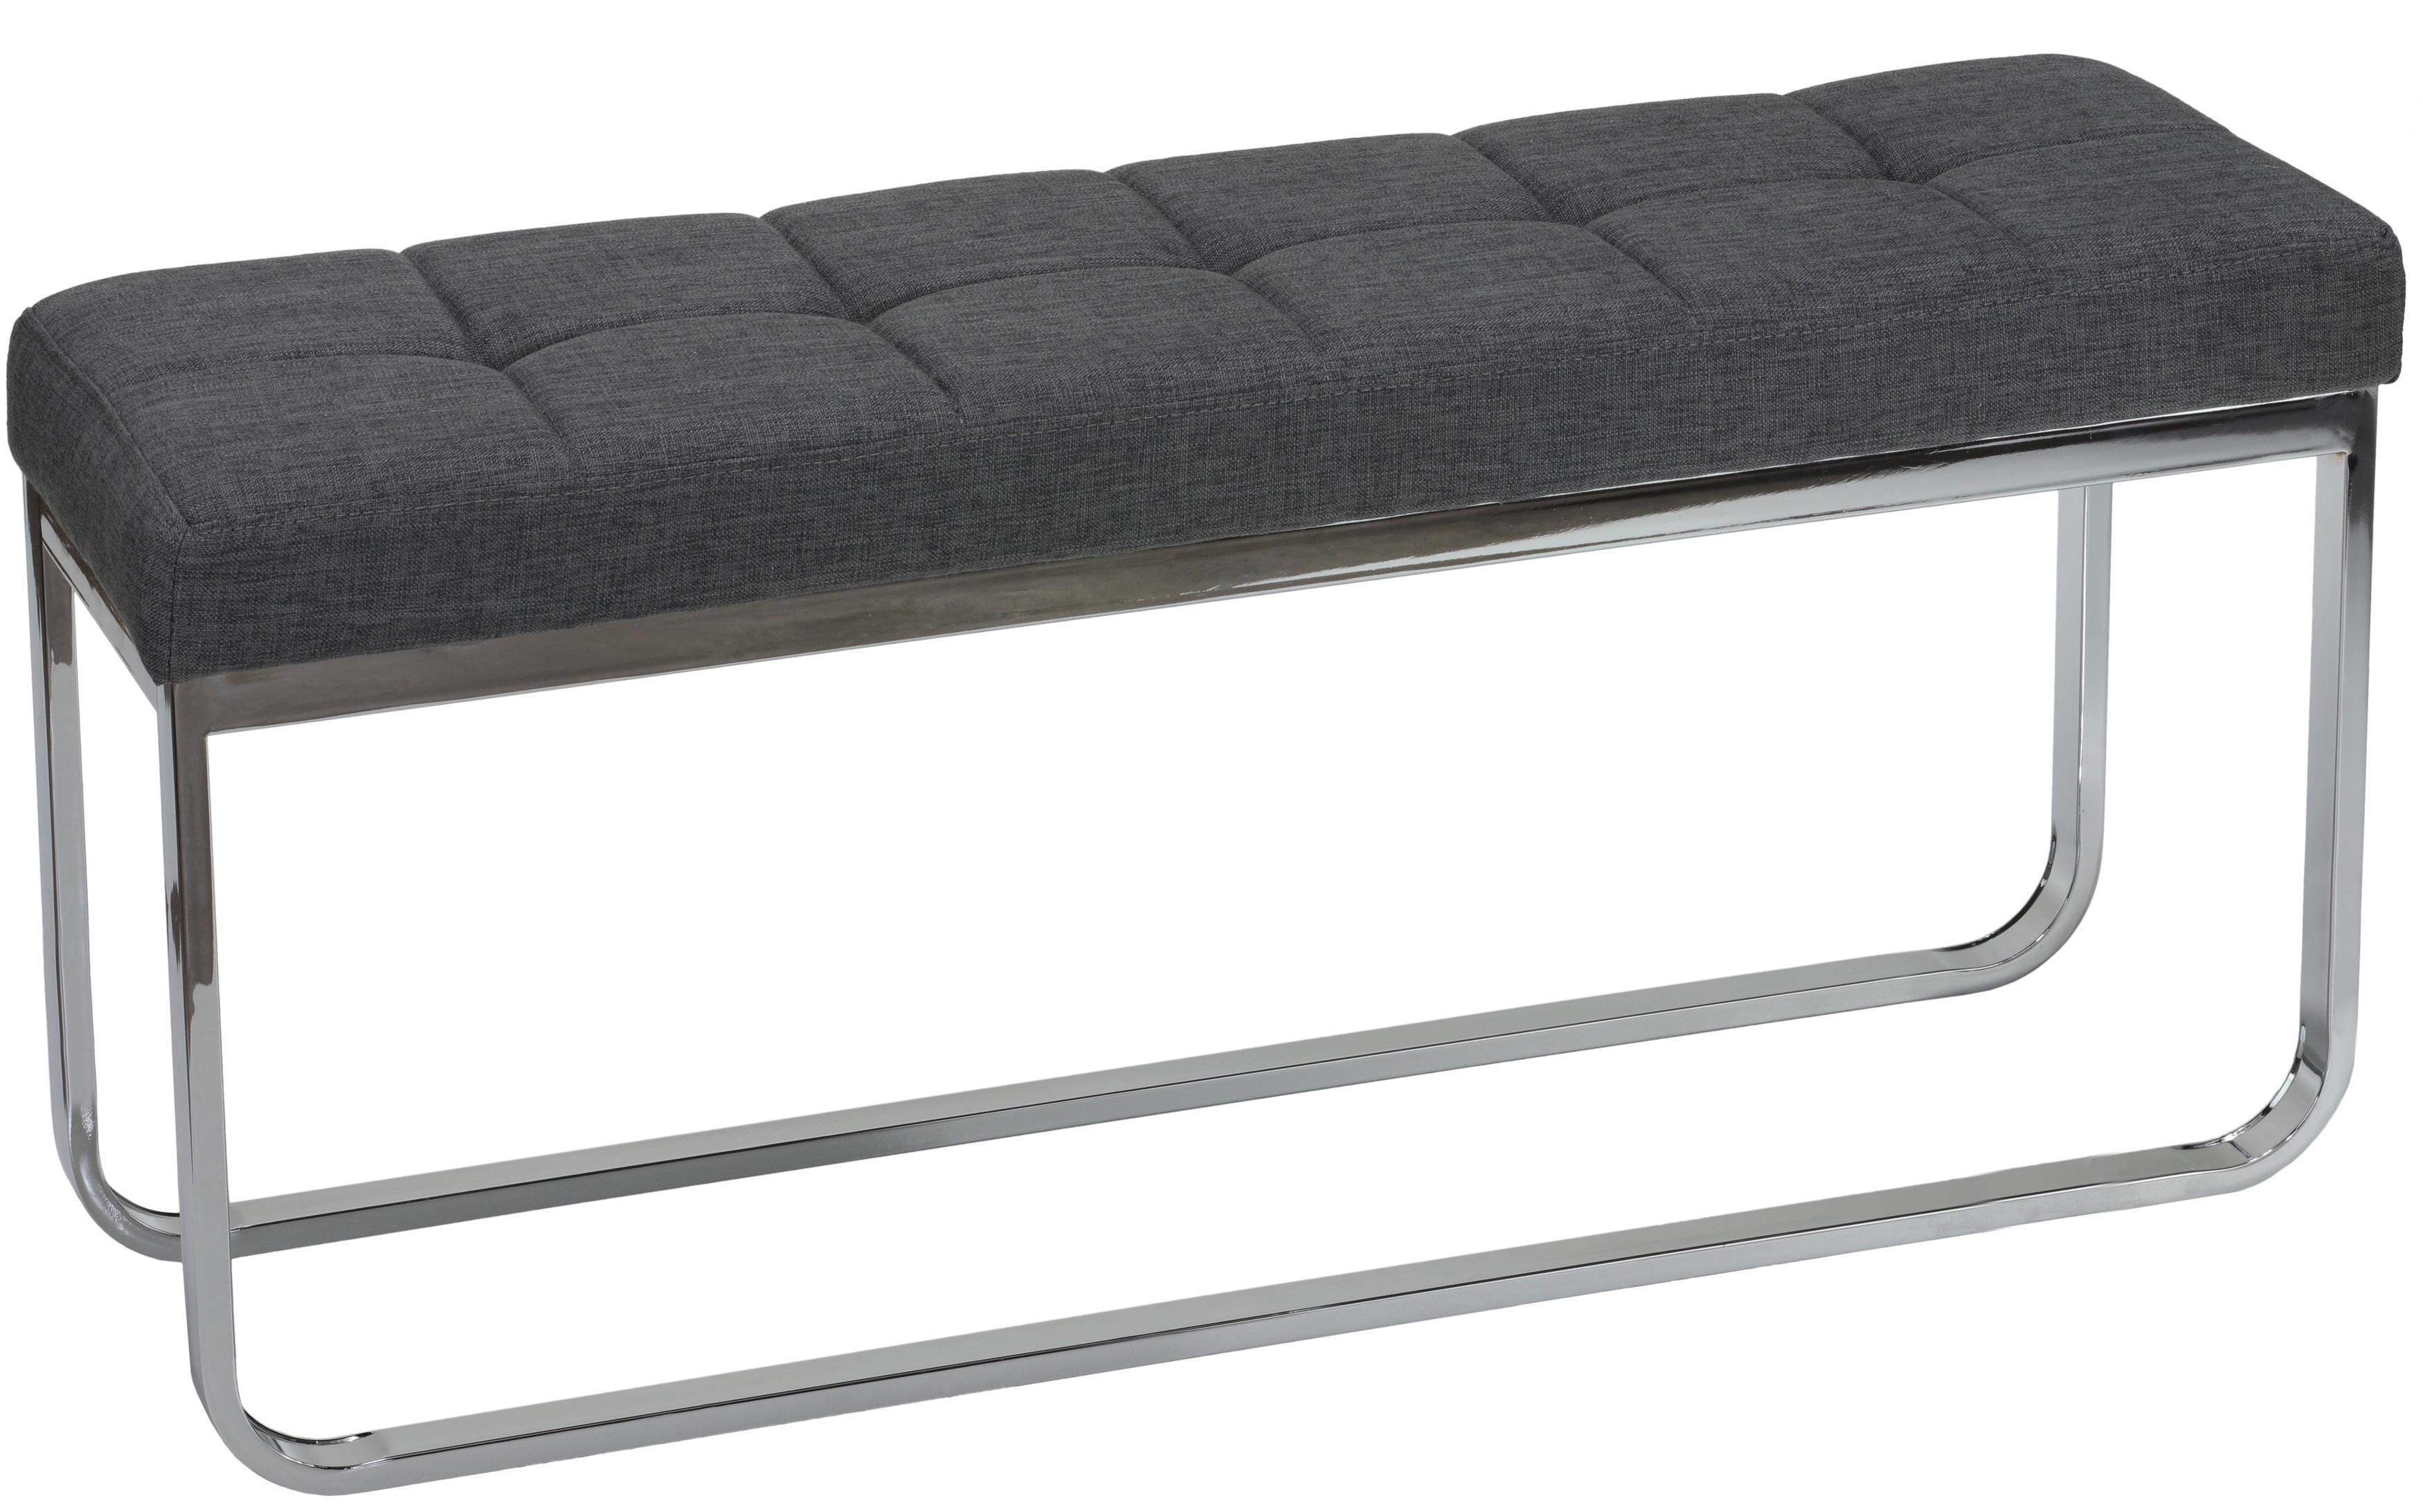 Contemporary Nola Narrow Bench in Grey Linen with Polished Stainless Steel Legs